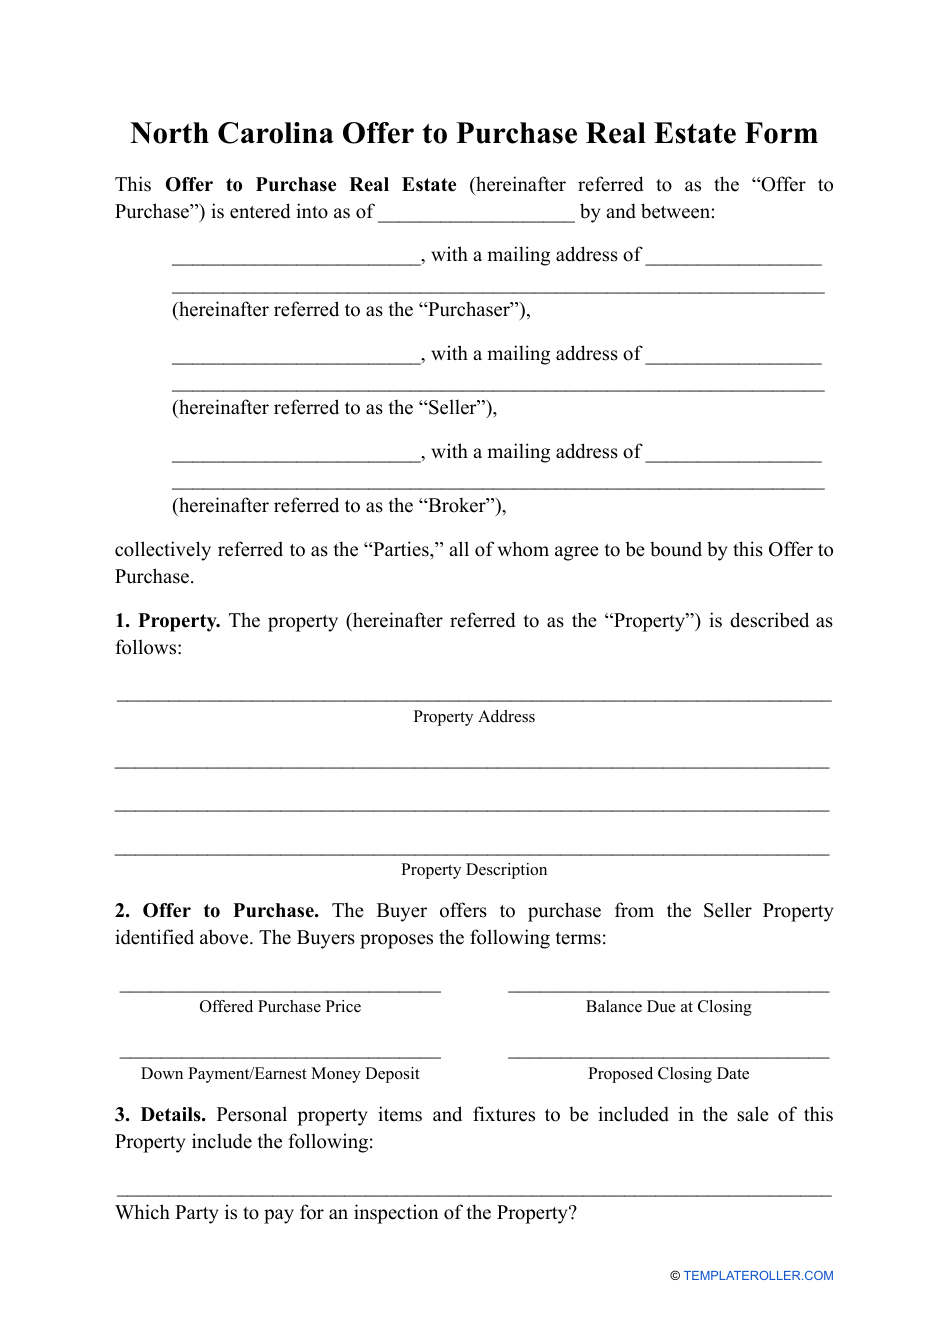 Offer to Purchase Real Estate Form - North Carolina, Page 1